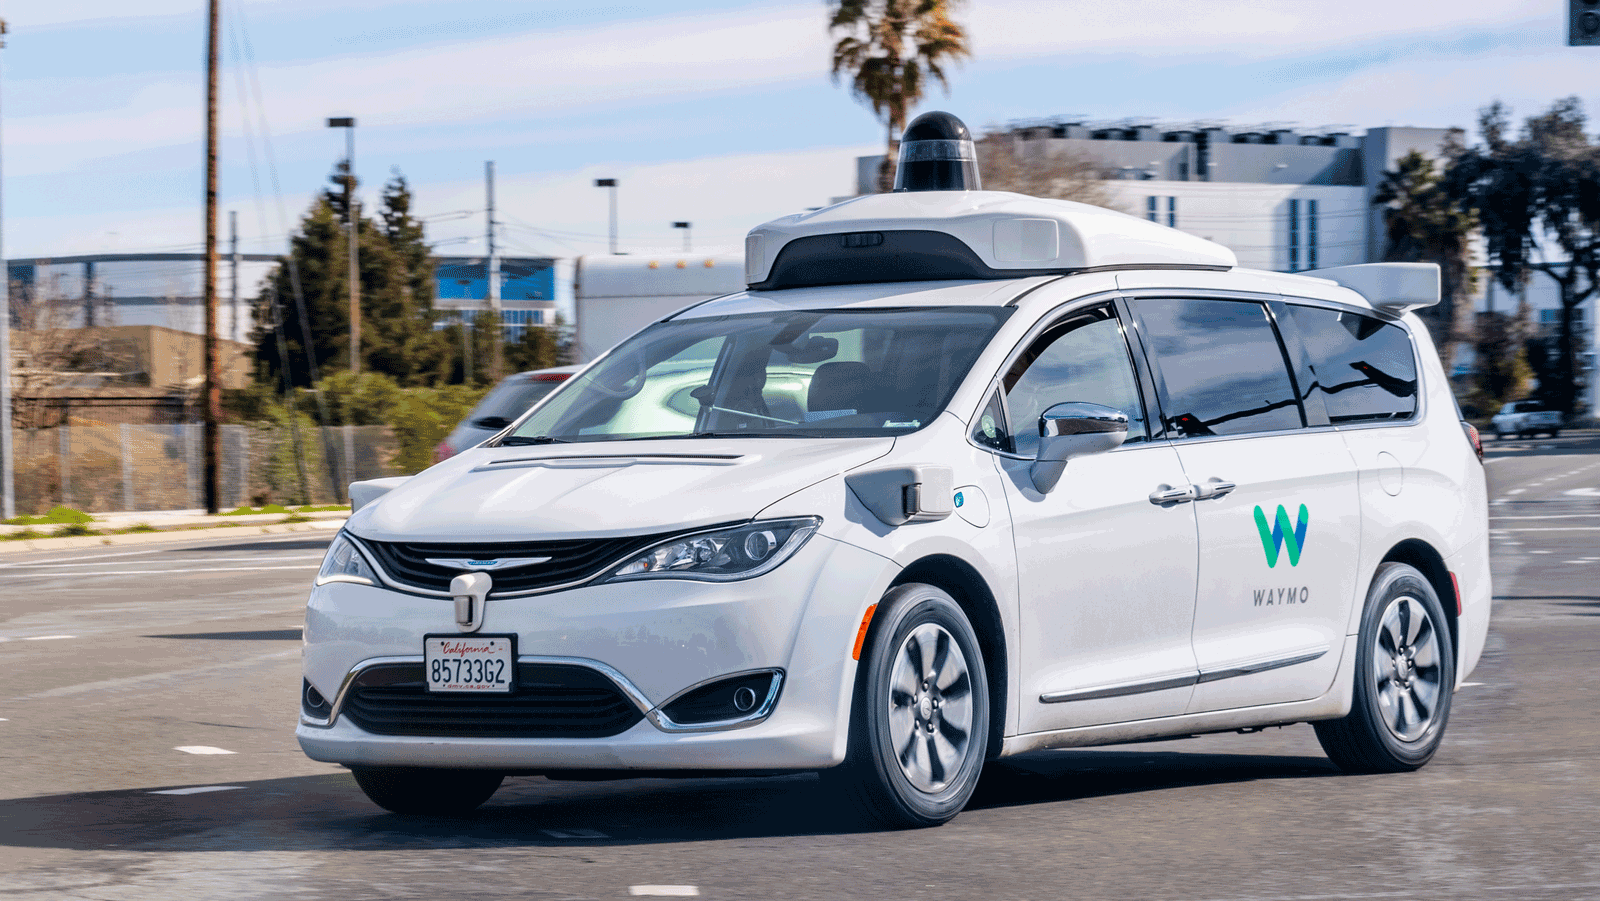 Waymo issues recall after two of its autonomous cars crash into the same vehicle